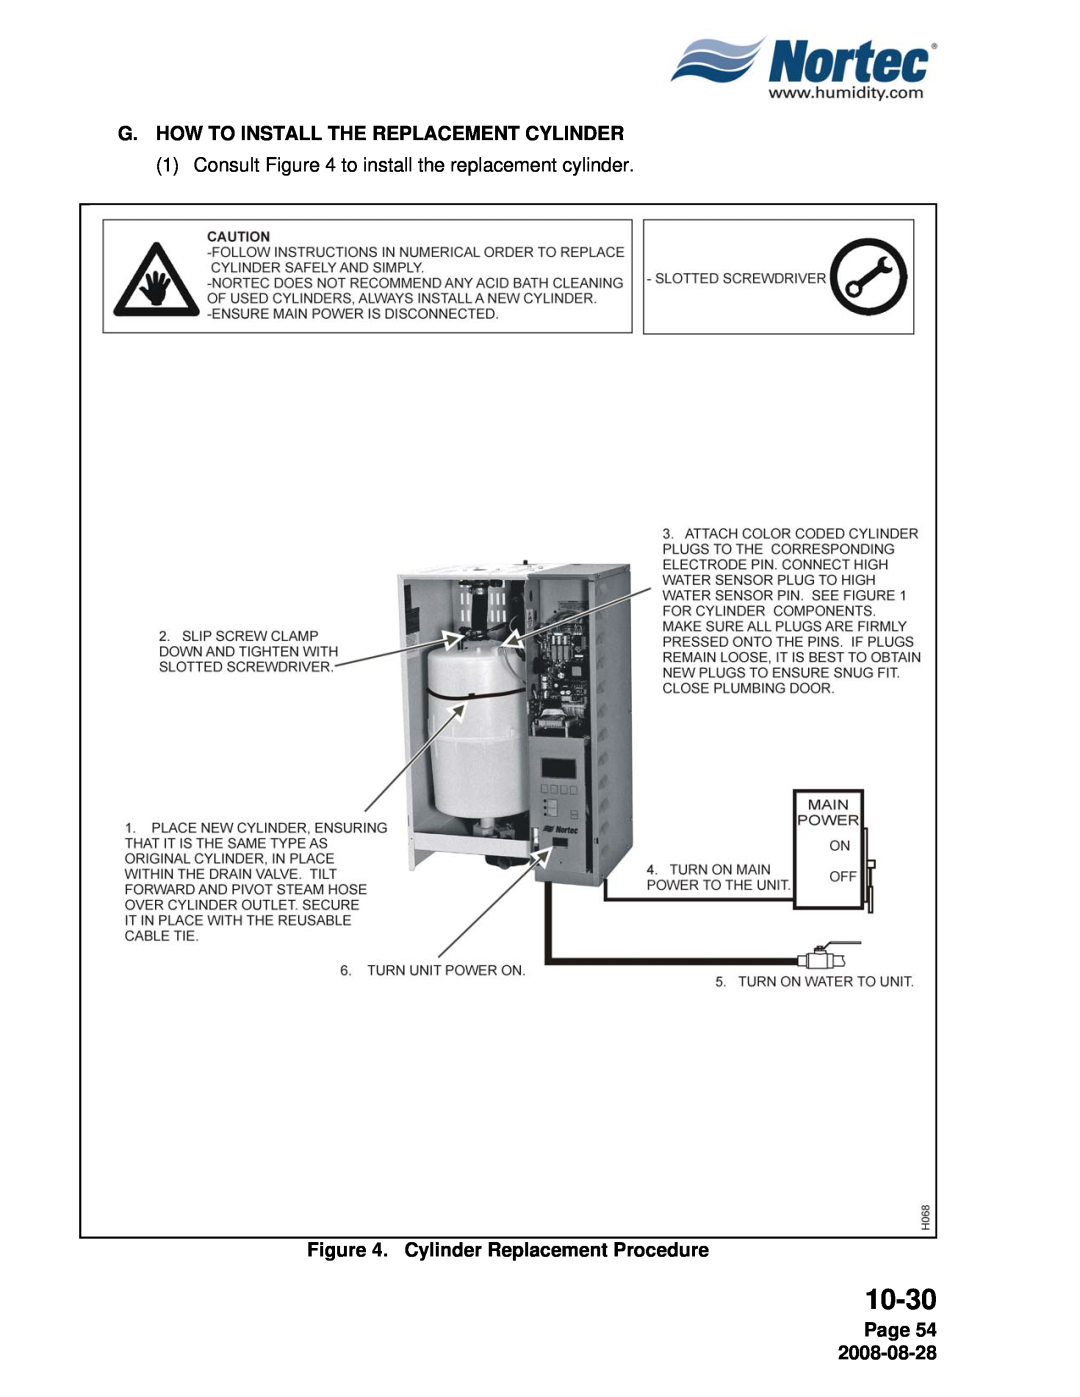 Nortec NH Series G.How To Install The Replacement Cylinder, Cylinder Replacement Procedure, Page 54, 10-30 